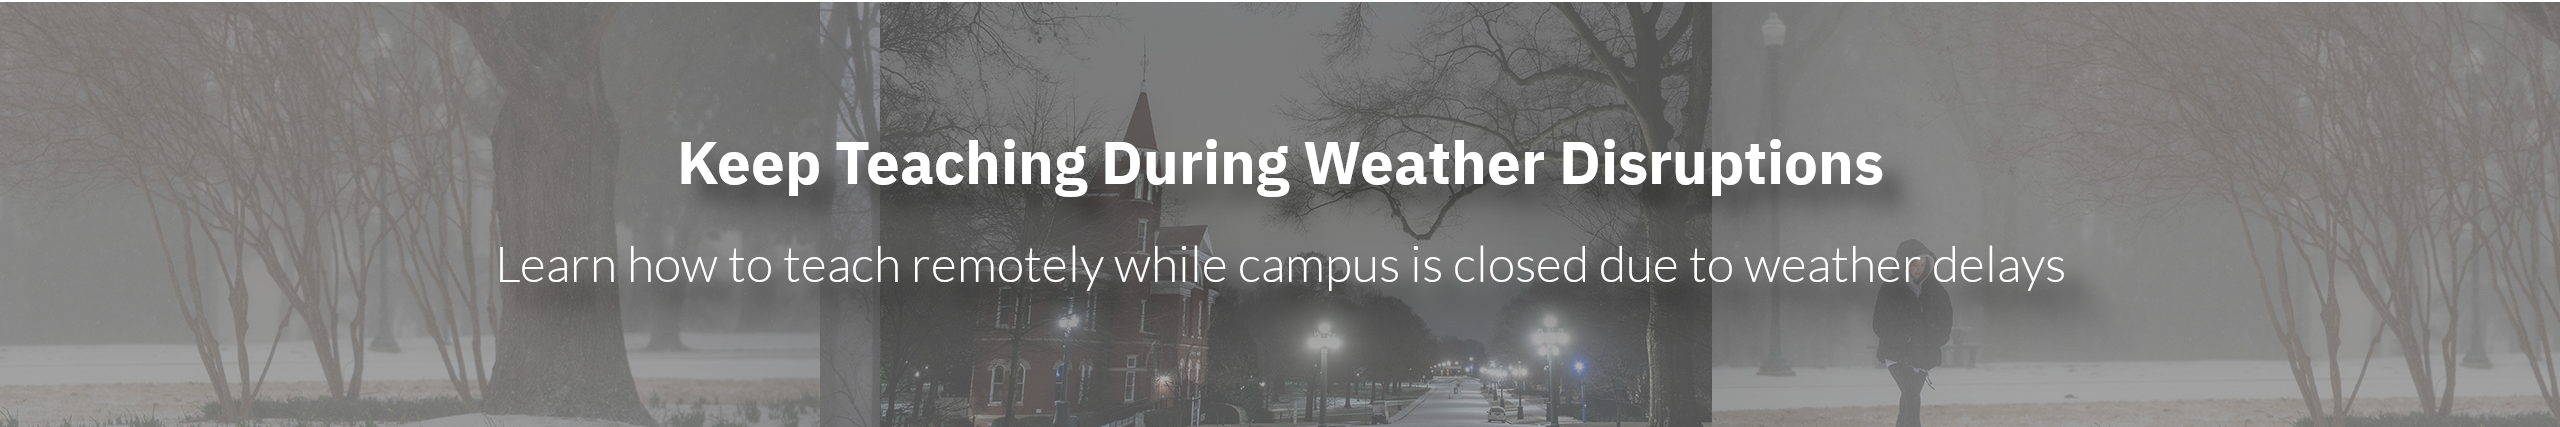 Keep Teaching during Weather Disruptions:Here are some ideas to keep in mind if you are going to teach remotely while campus is closed due to weather delays